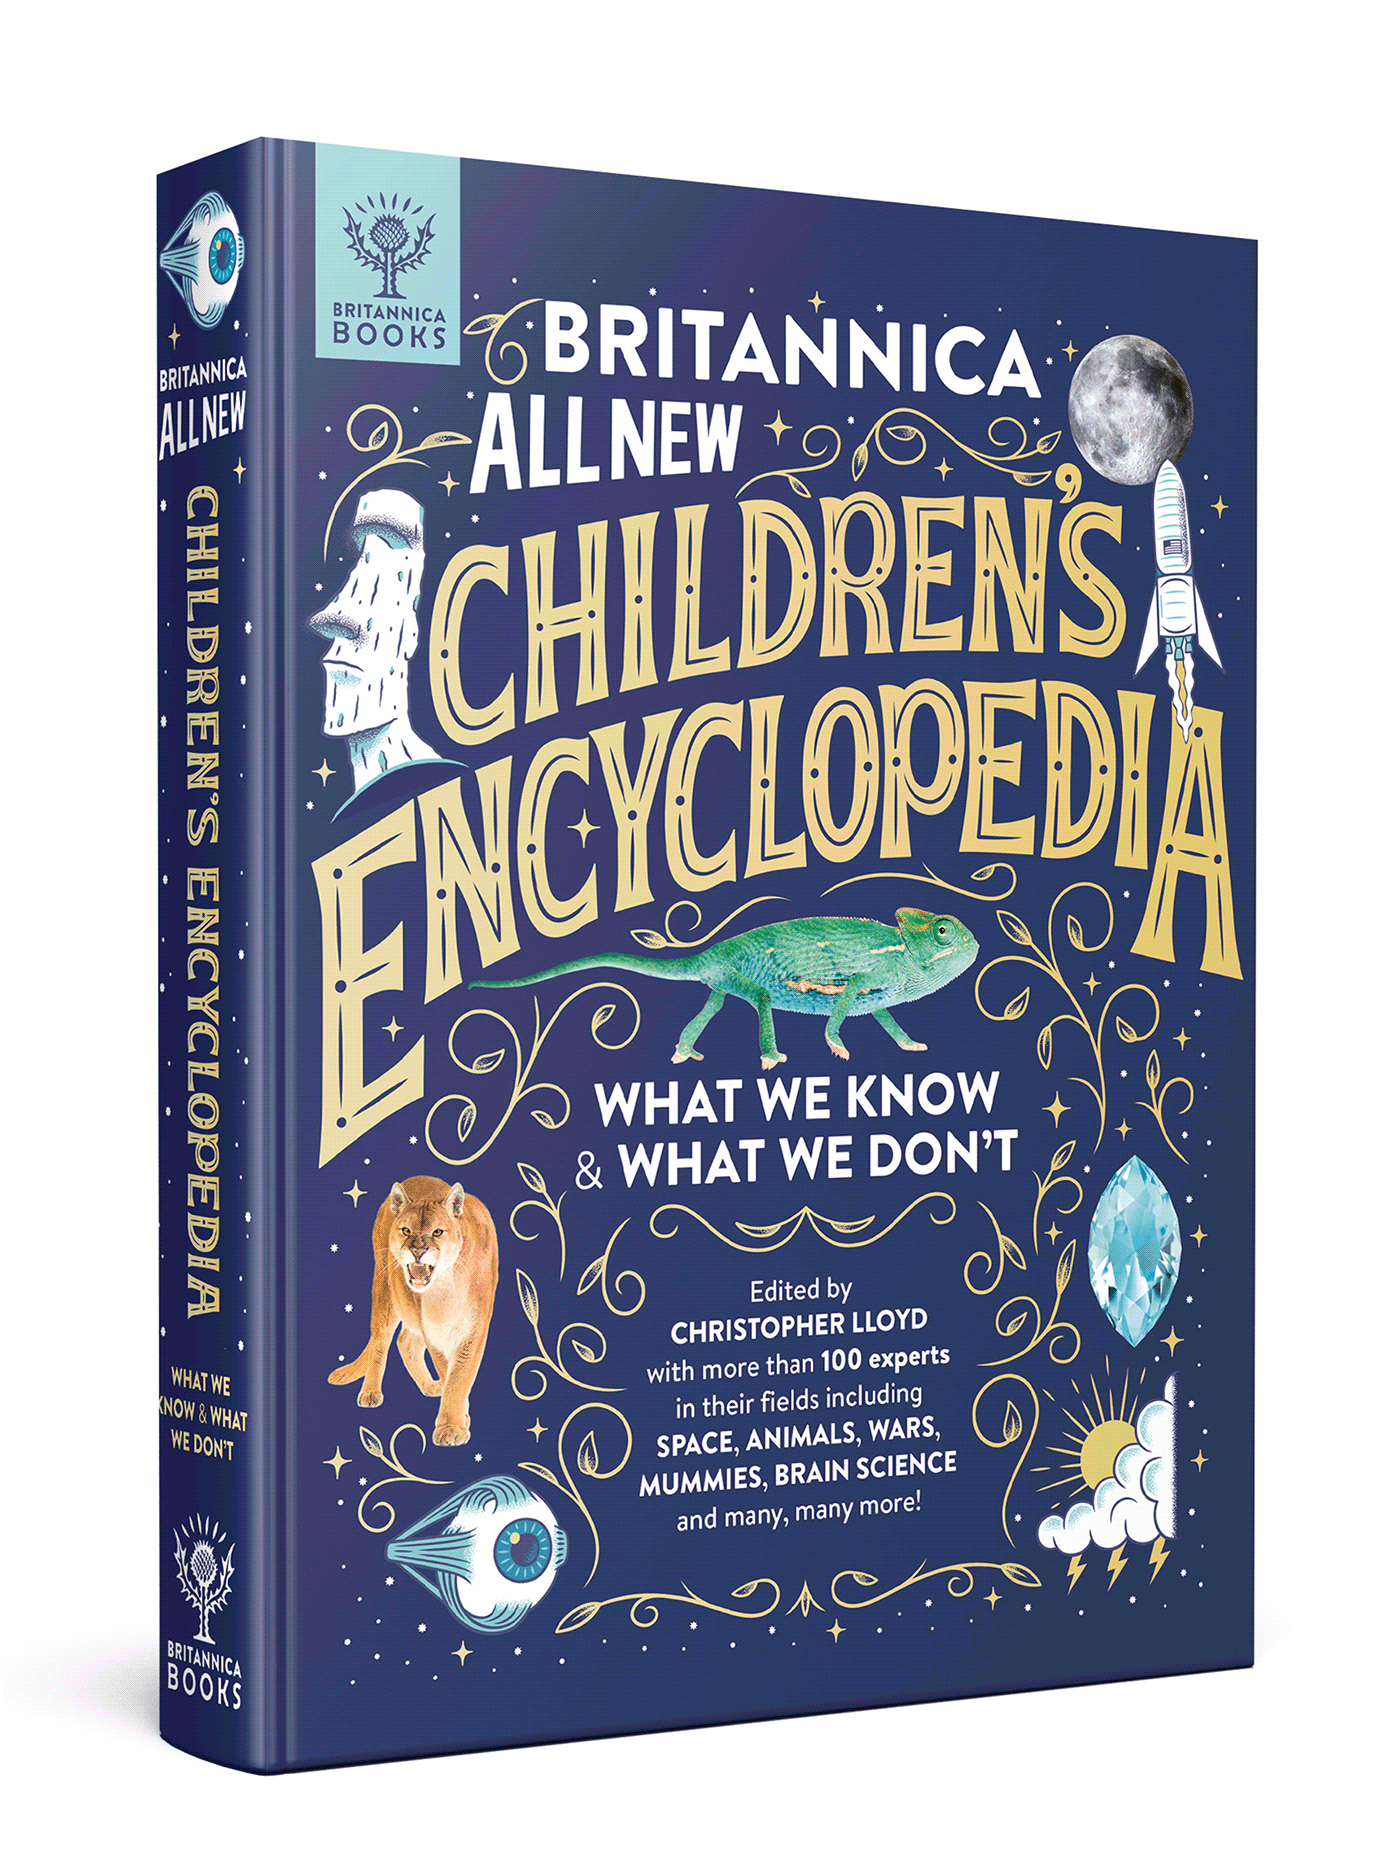 book cover books Britannica encyclopaedia hand type history Illustrator lettering science typography  